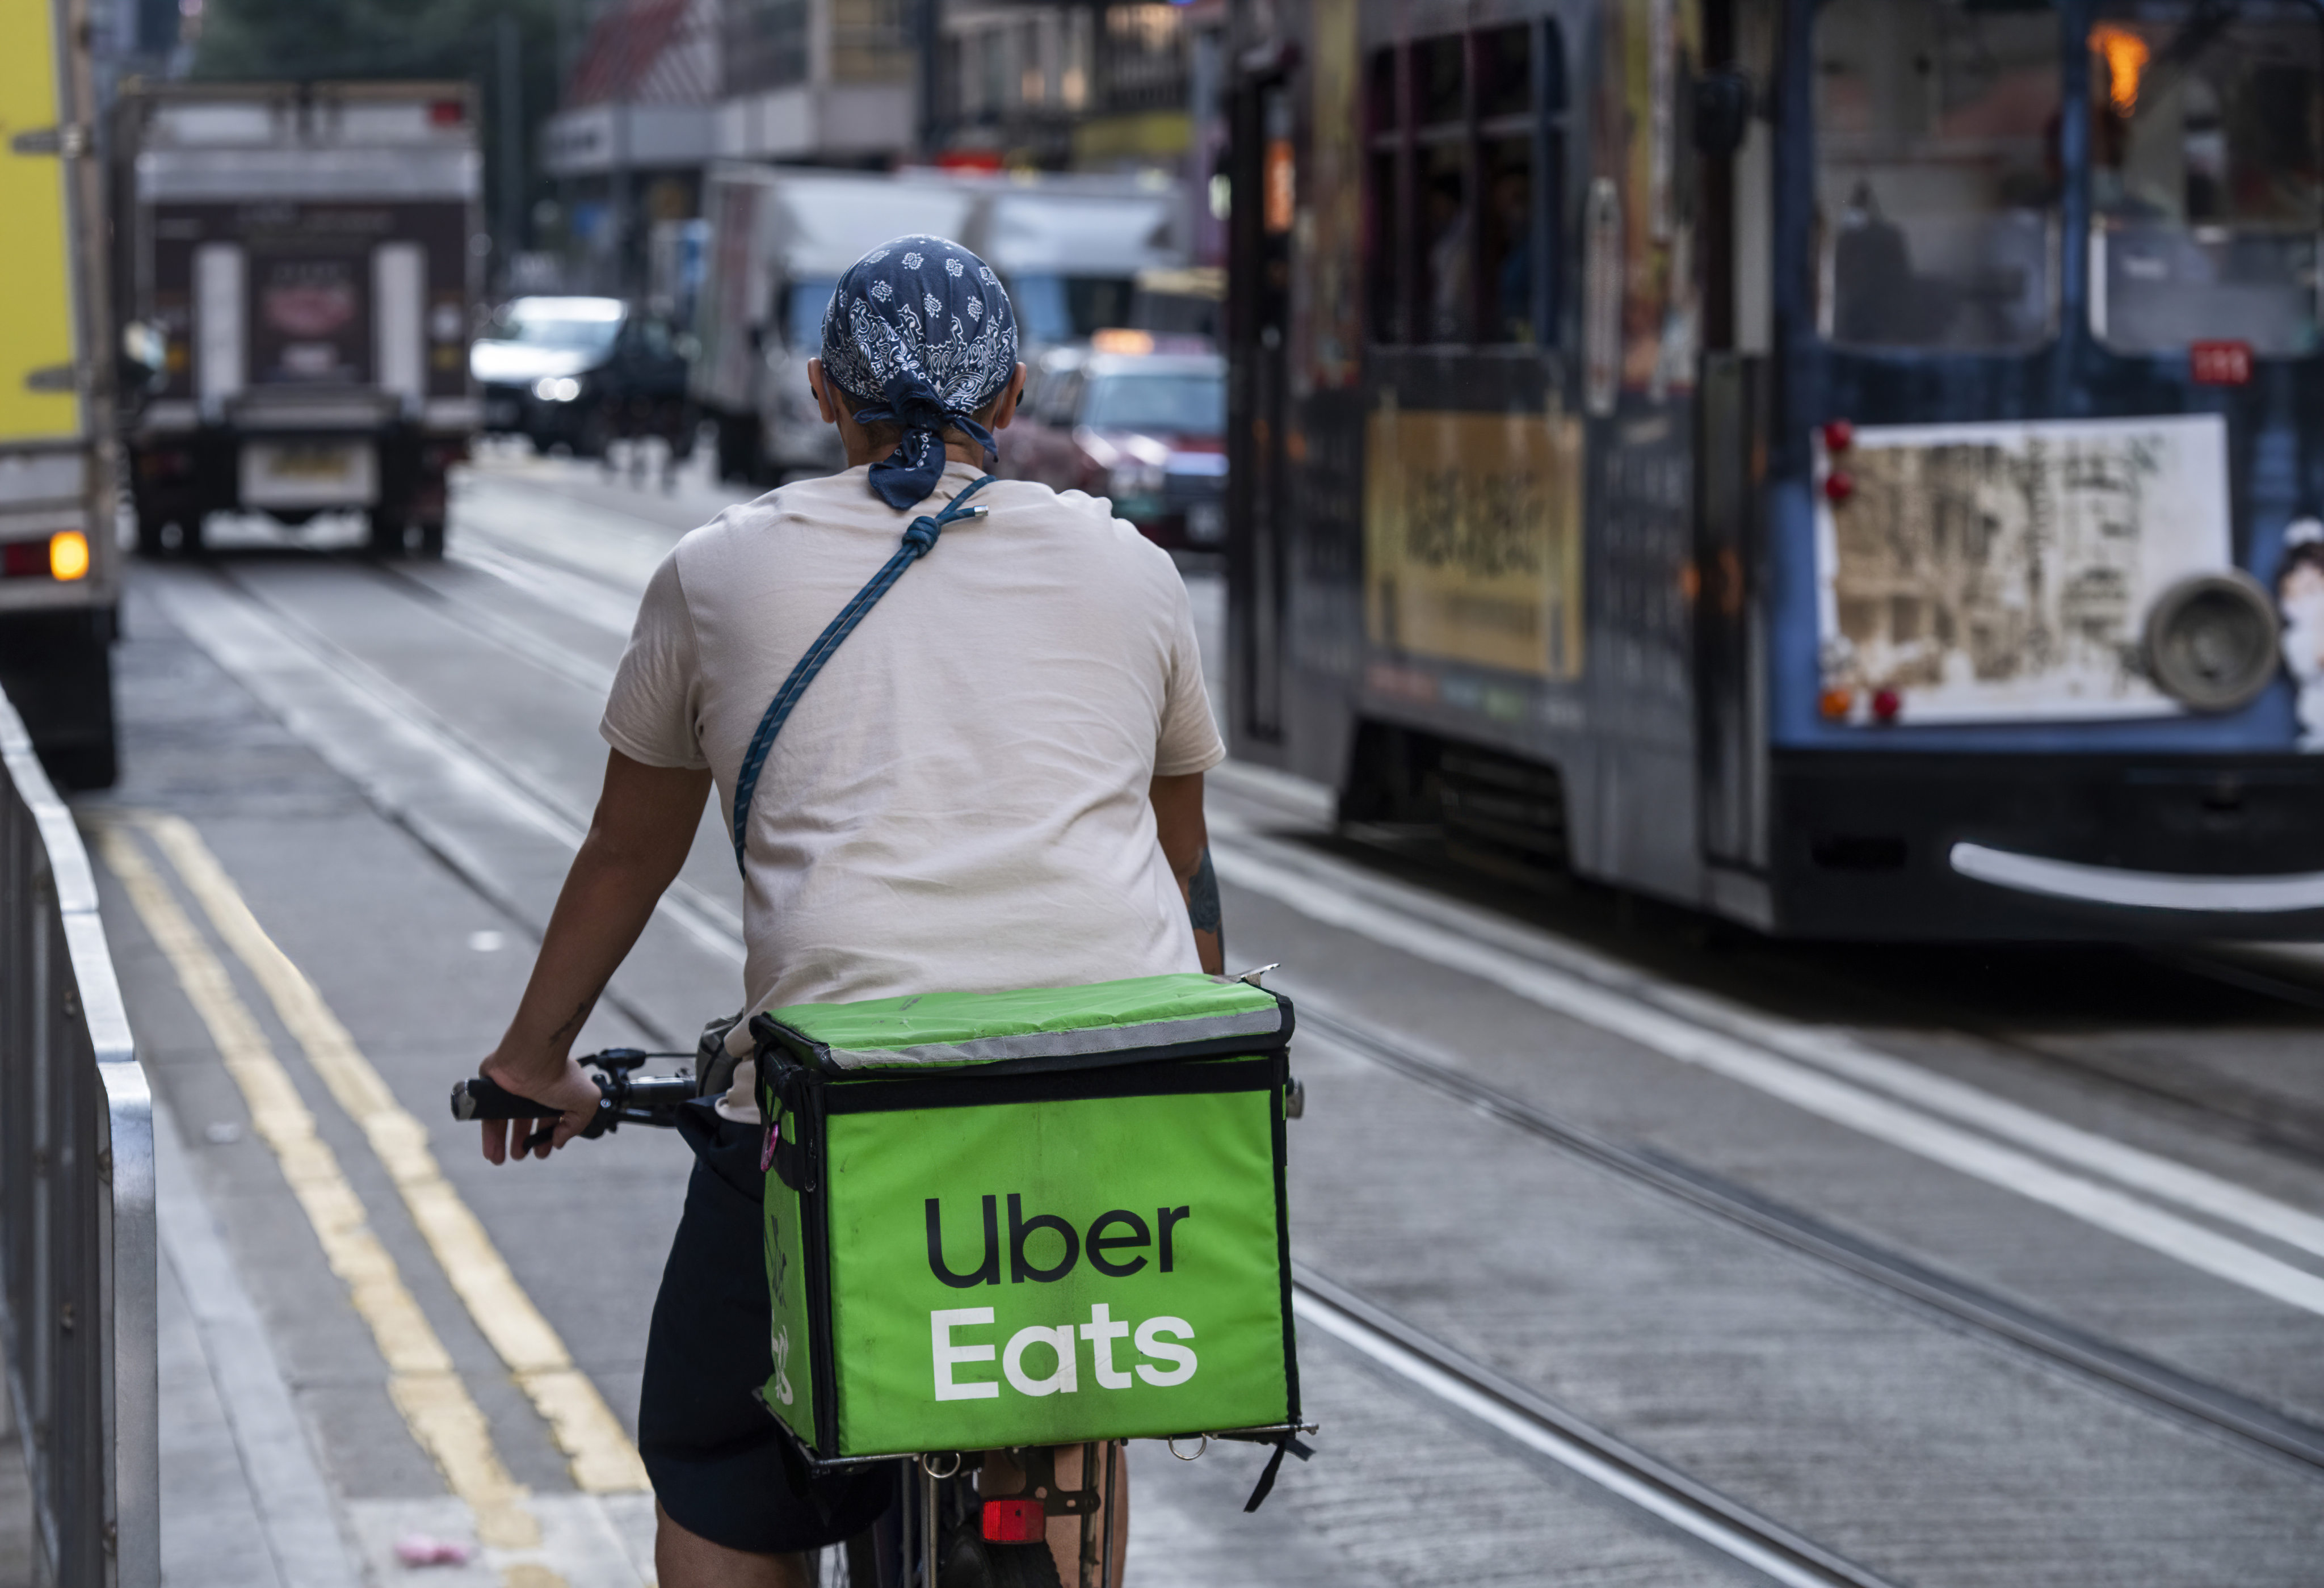 A delivery worker from Uber Eats, the ride-hailing giant’s take-out arm, is seen riding on a bicycle in Hong Kong on December 30, 2021. Photo: Anadolu Agency via Getty Images